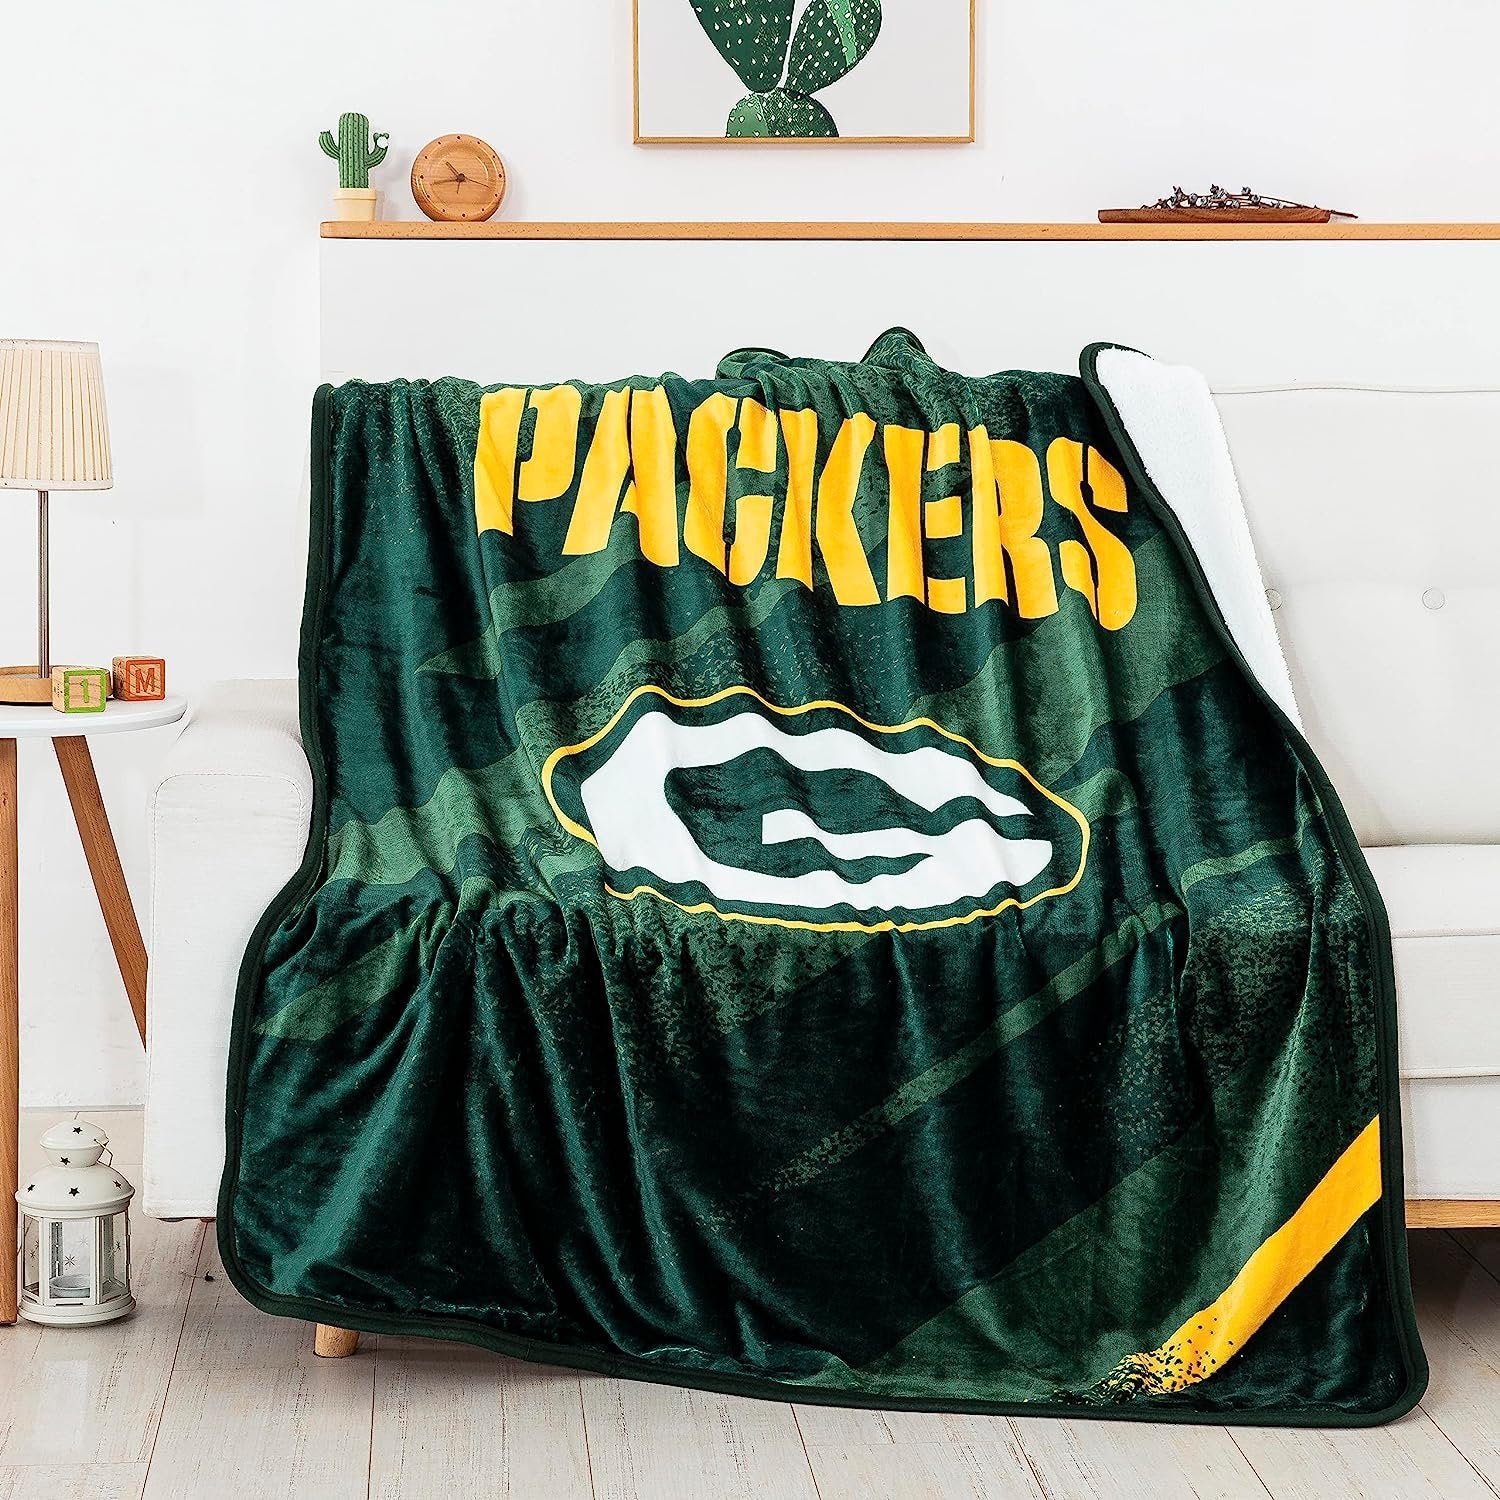 Green Bay Packers Throw Blanket, Sherpa Raschel Polyester, Silk Touch Style, Velocity Design, 50x60 Inch